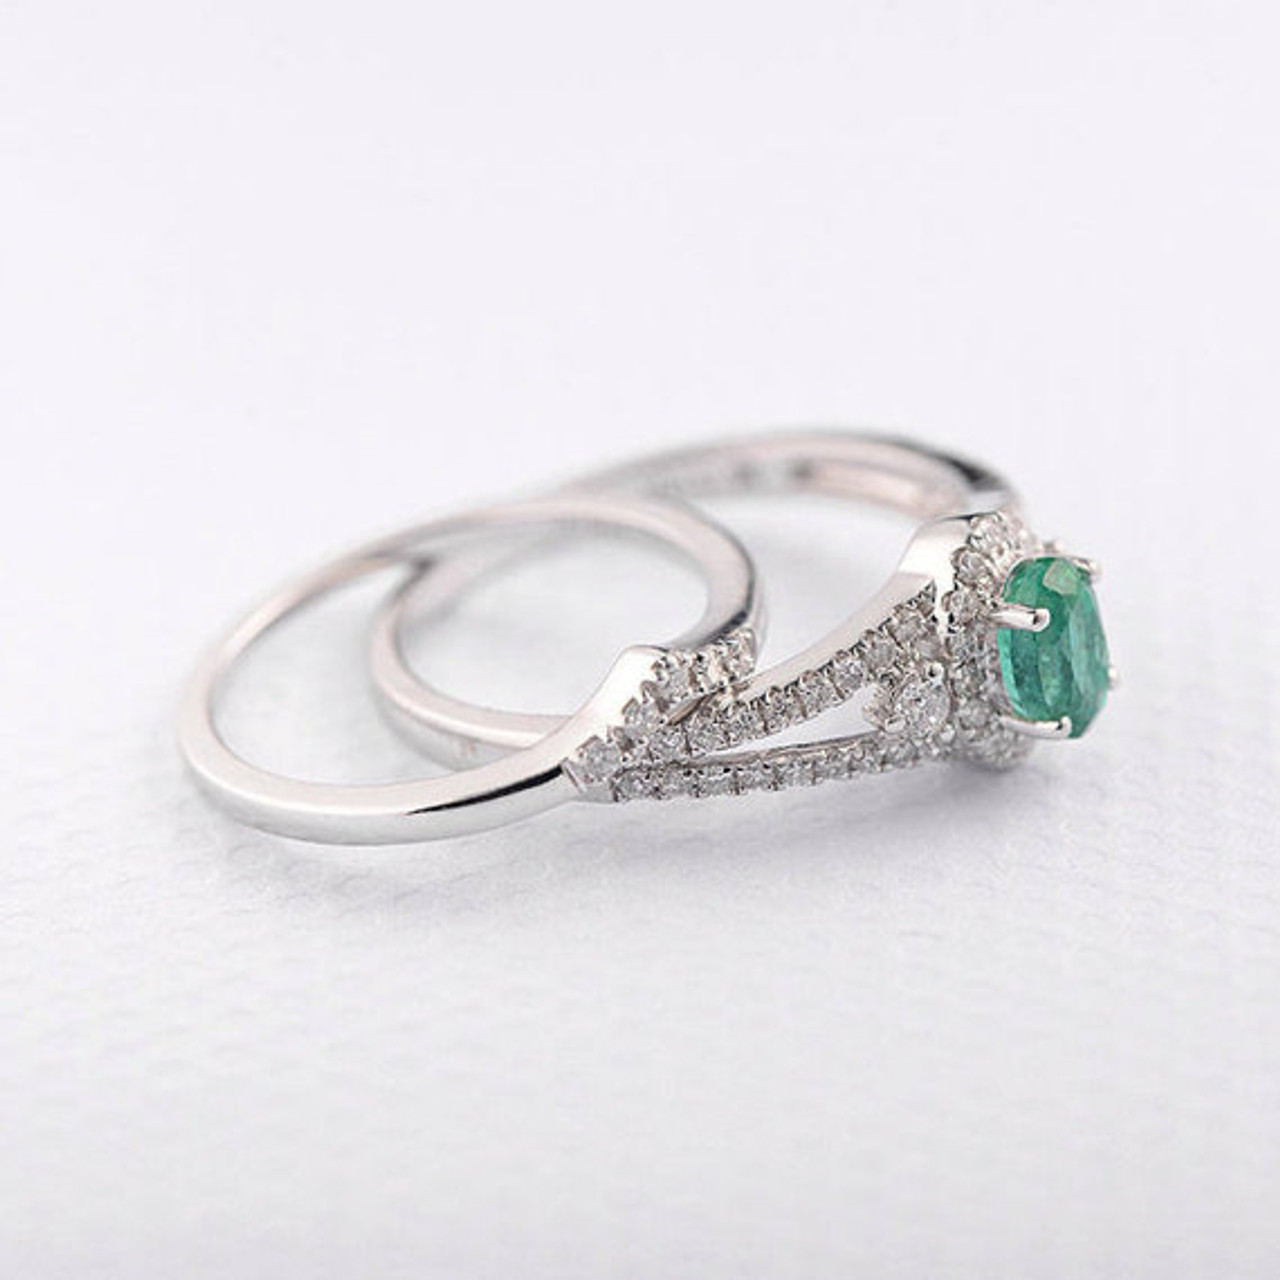 Emerald Ring Set - Oval Cut Engagement Ring in White Gold & Emerald ...